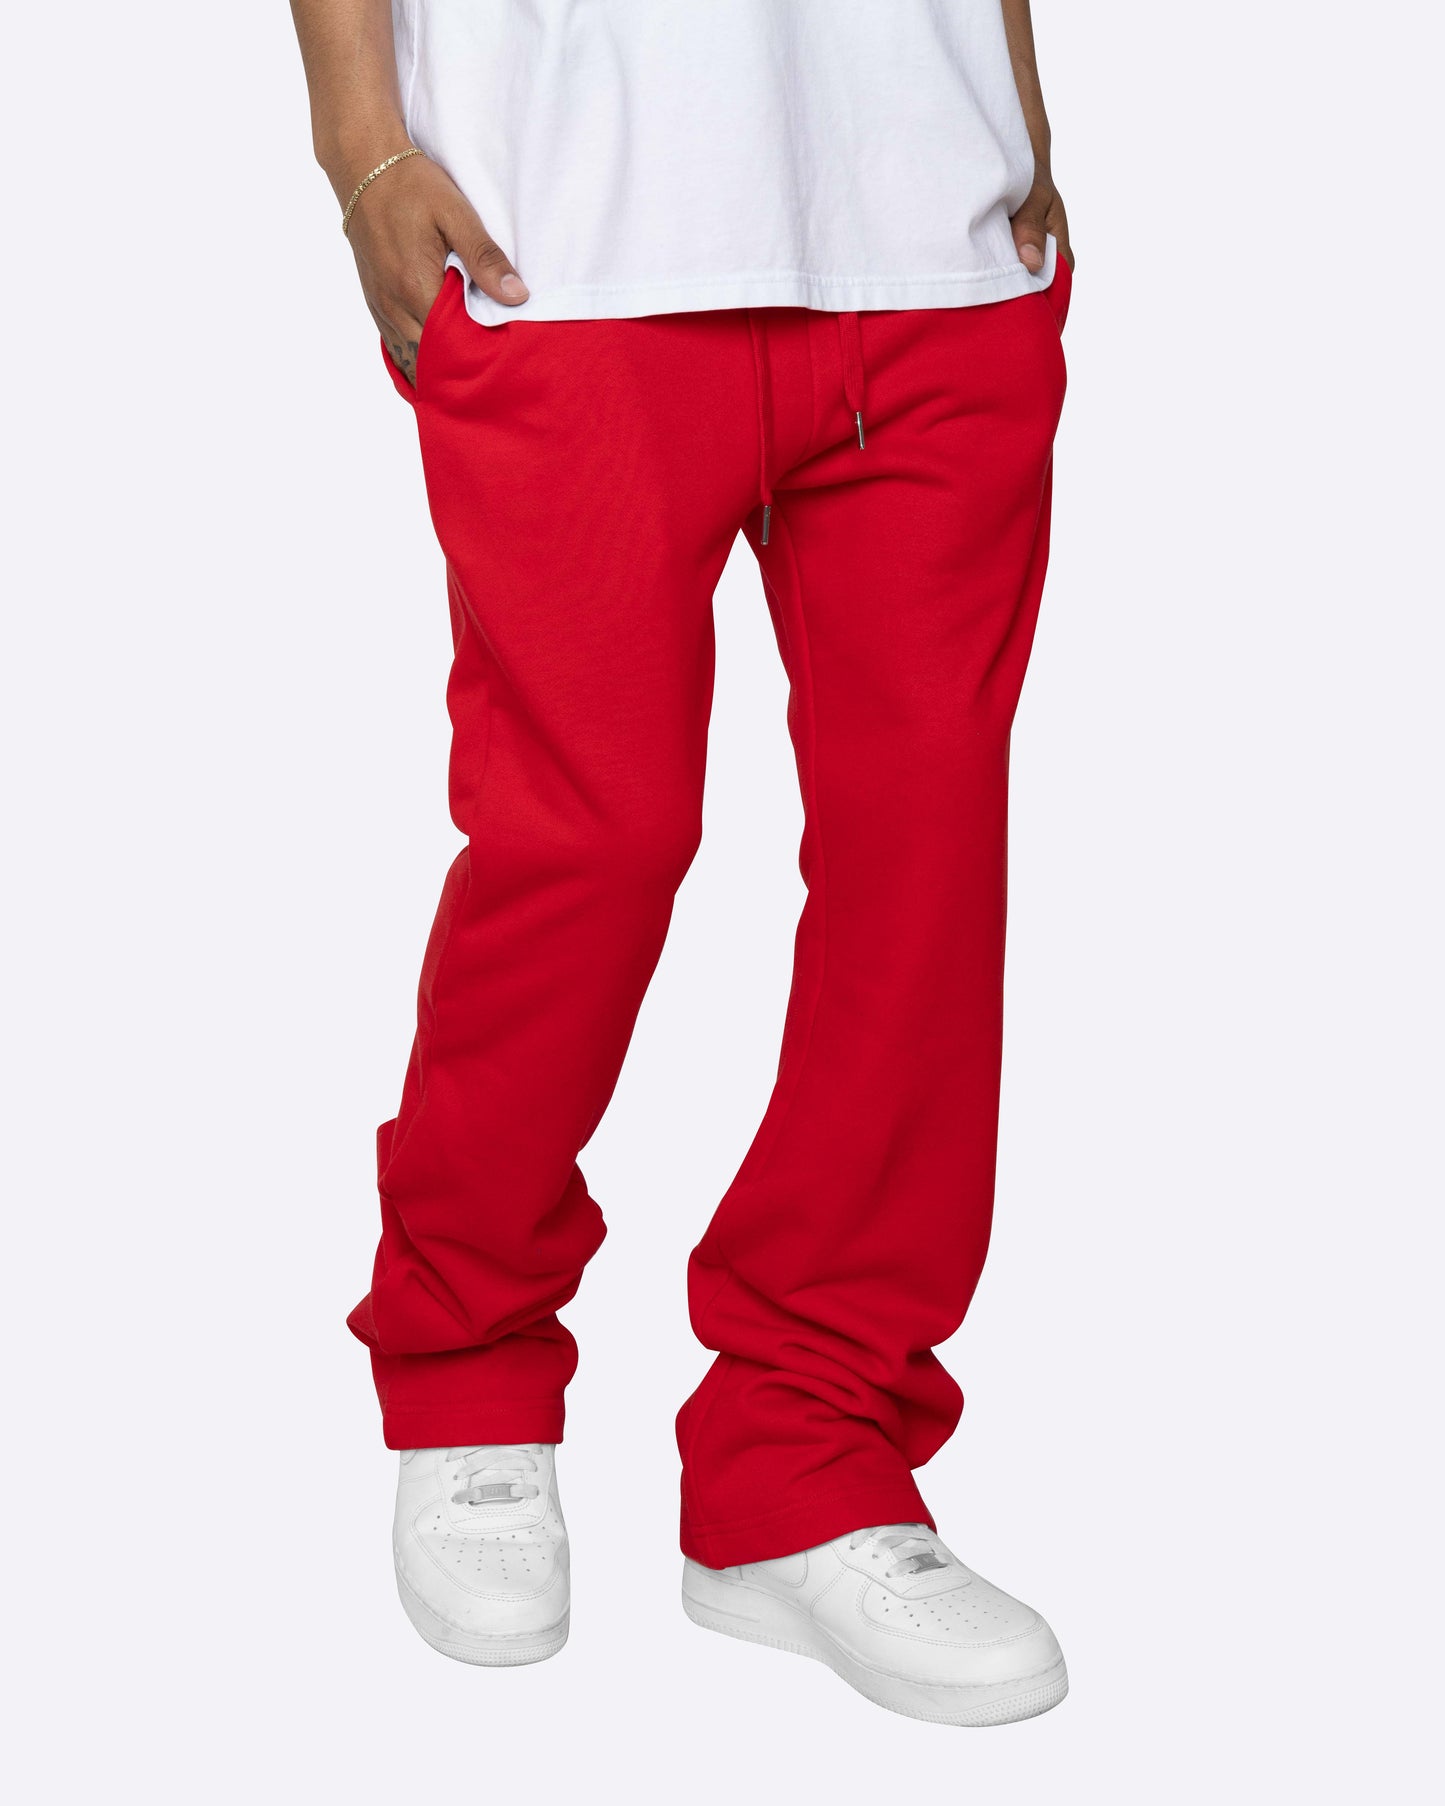 PERFECT FLARE SWEATPANTS-RED